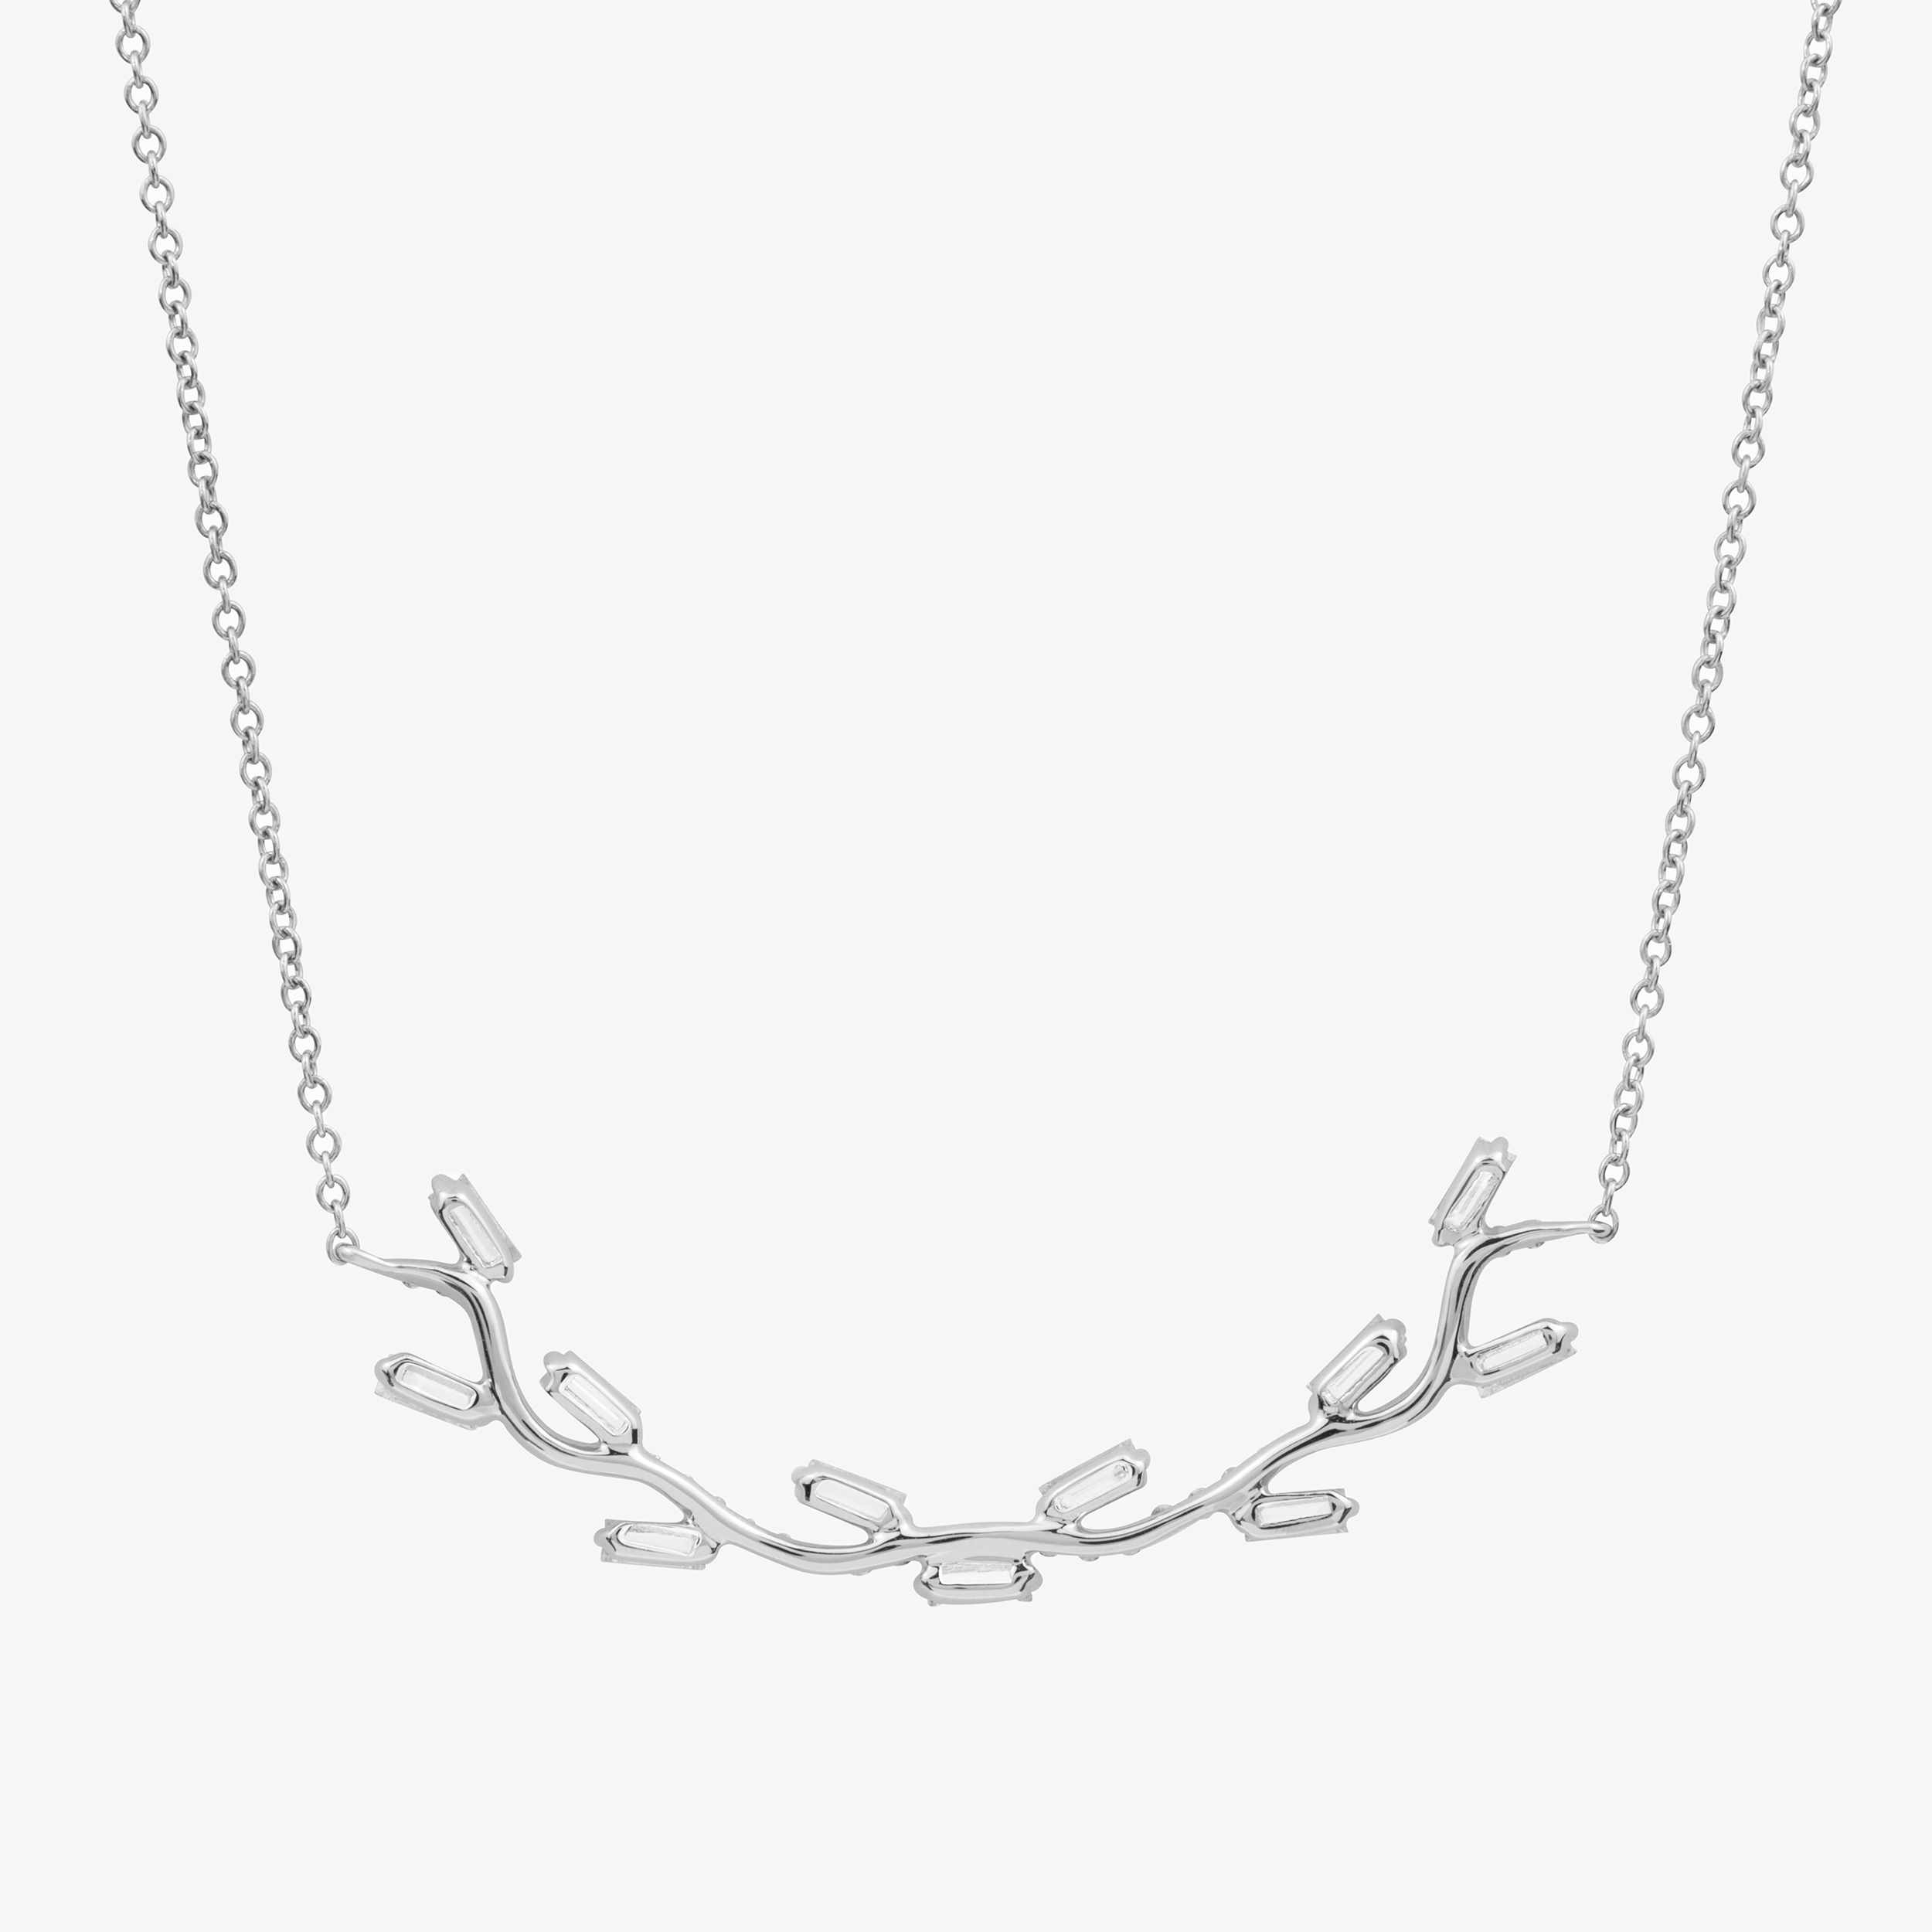 Tree Branch Necklace In 18K Solid White Gold With Diamonds